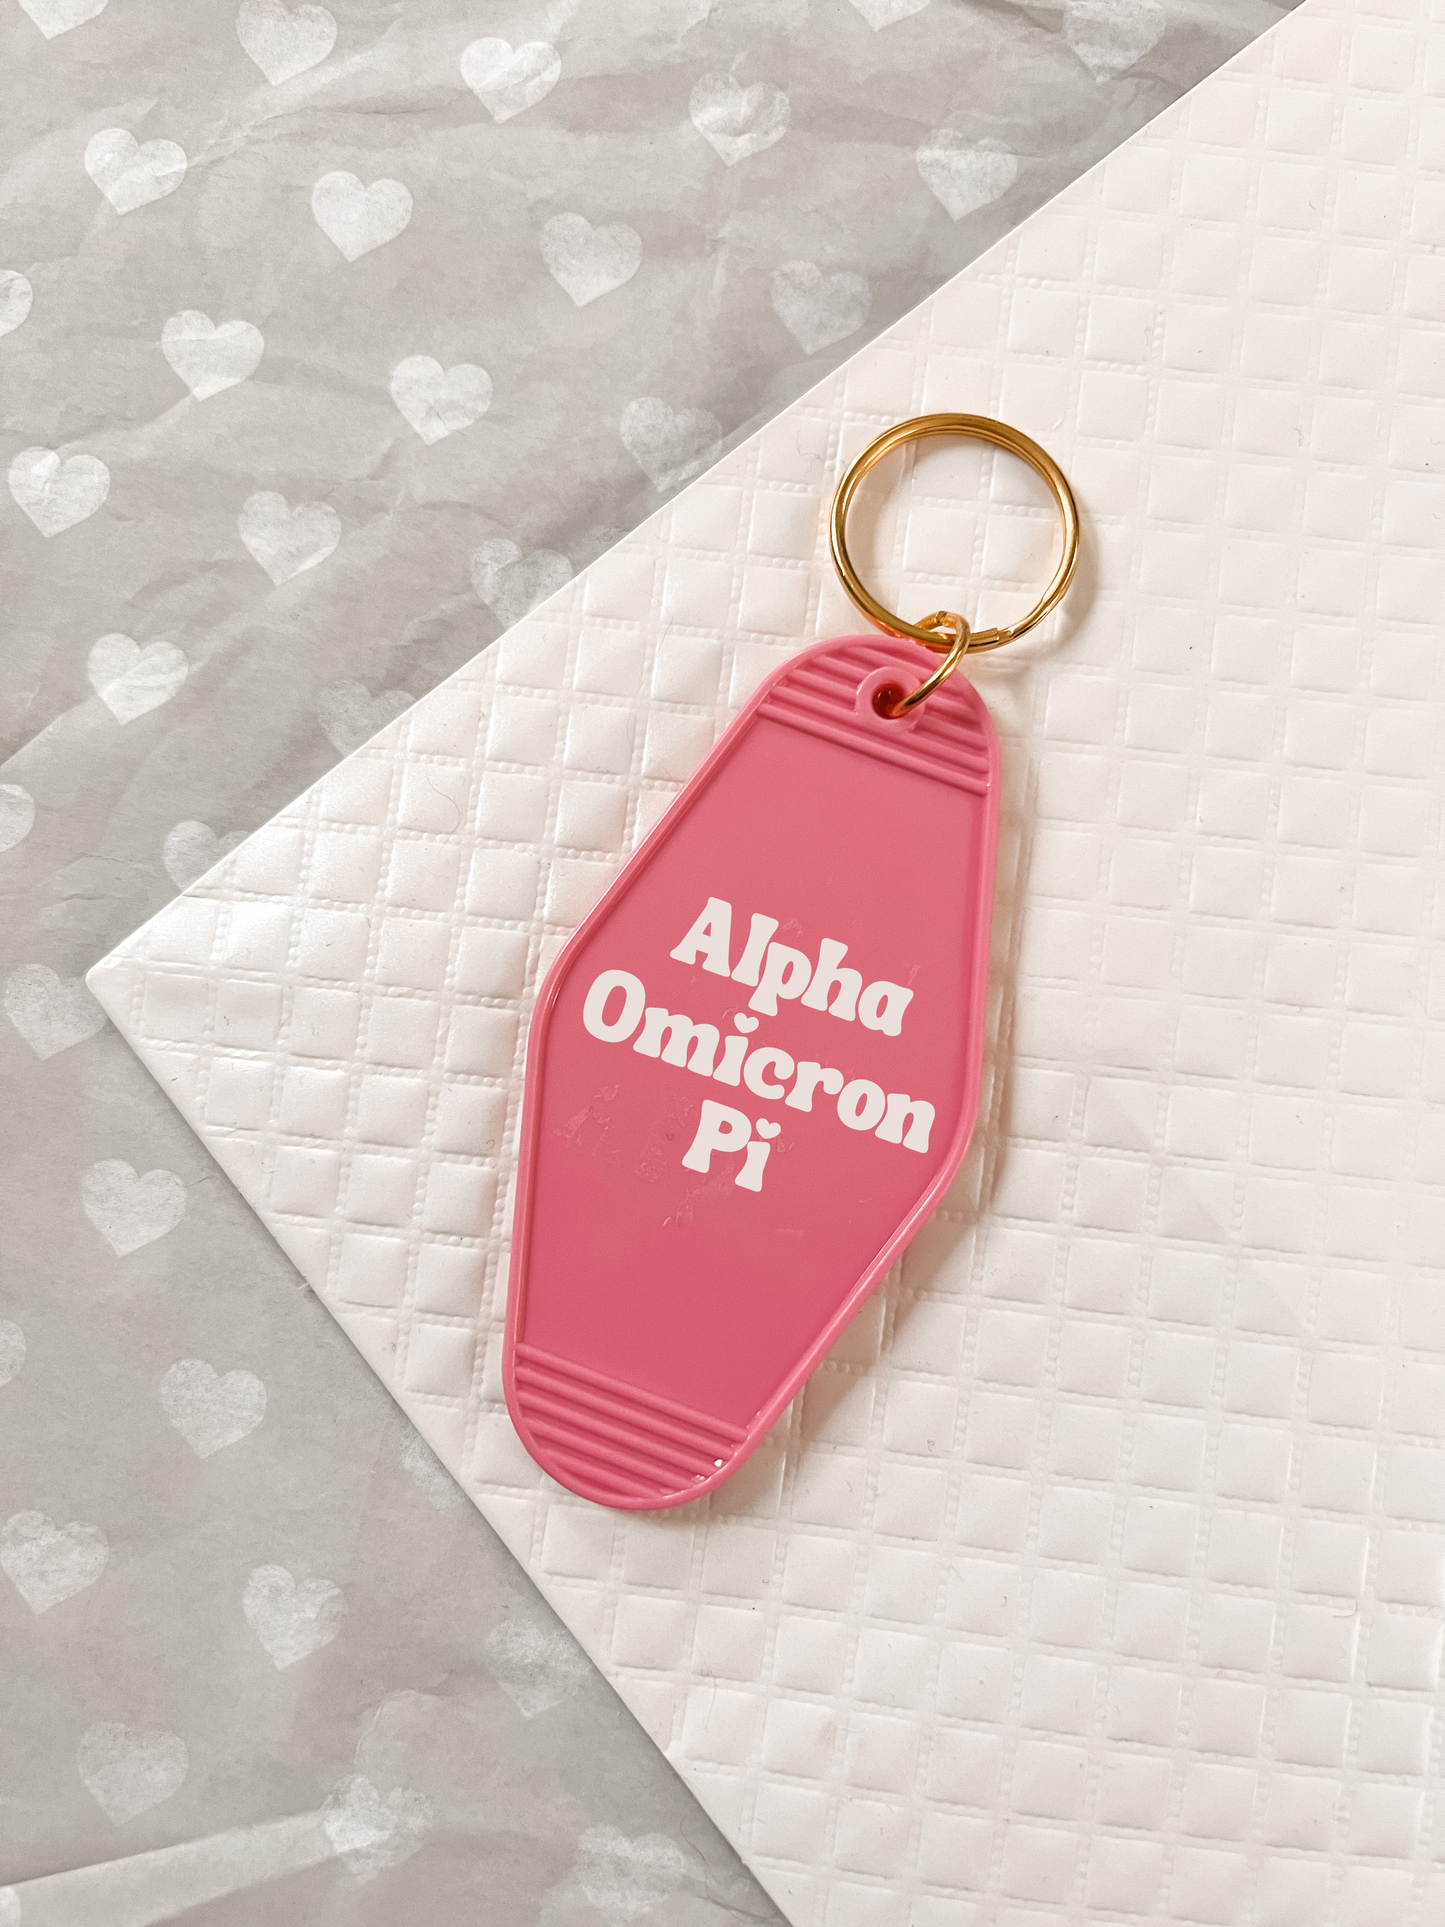 Alpha Omicron Pi Motel Hotel Key Chain in Hot pink with white letters and gold ring. AOII AOPI